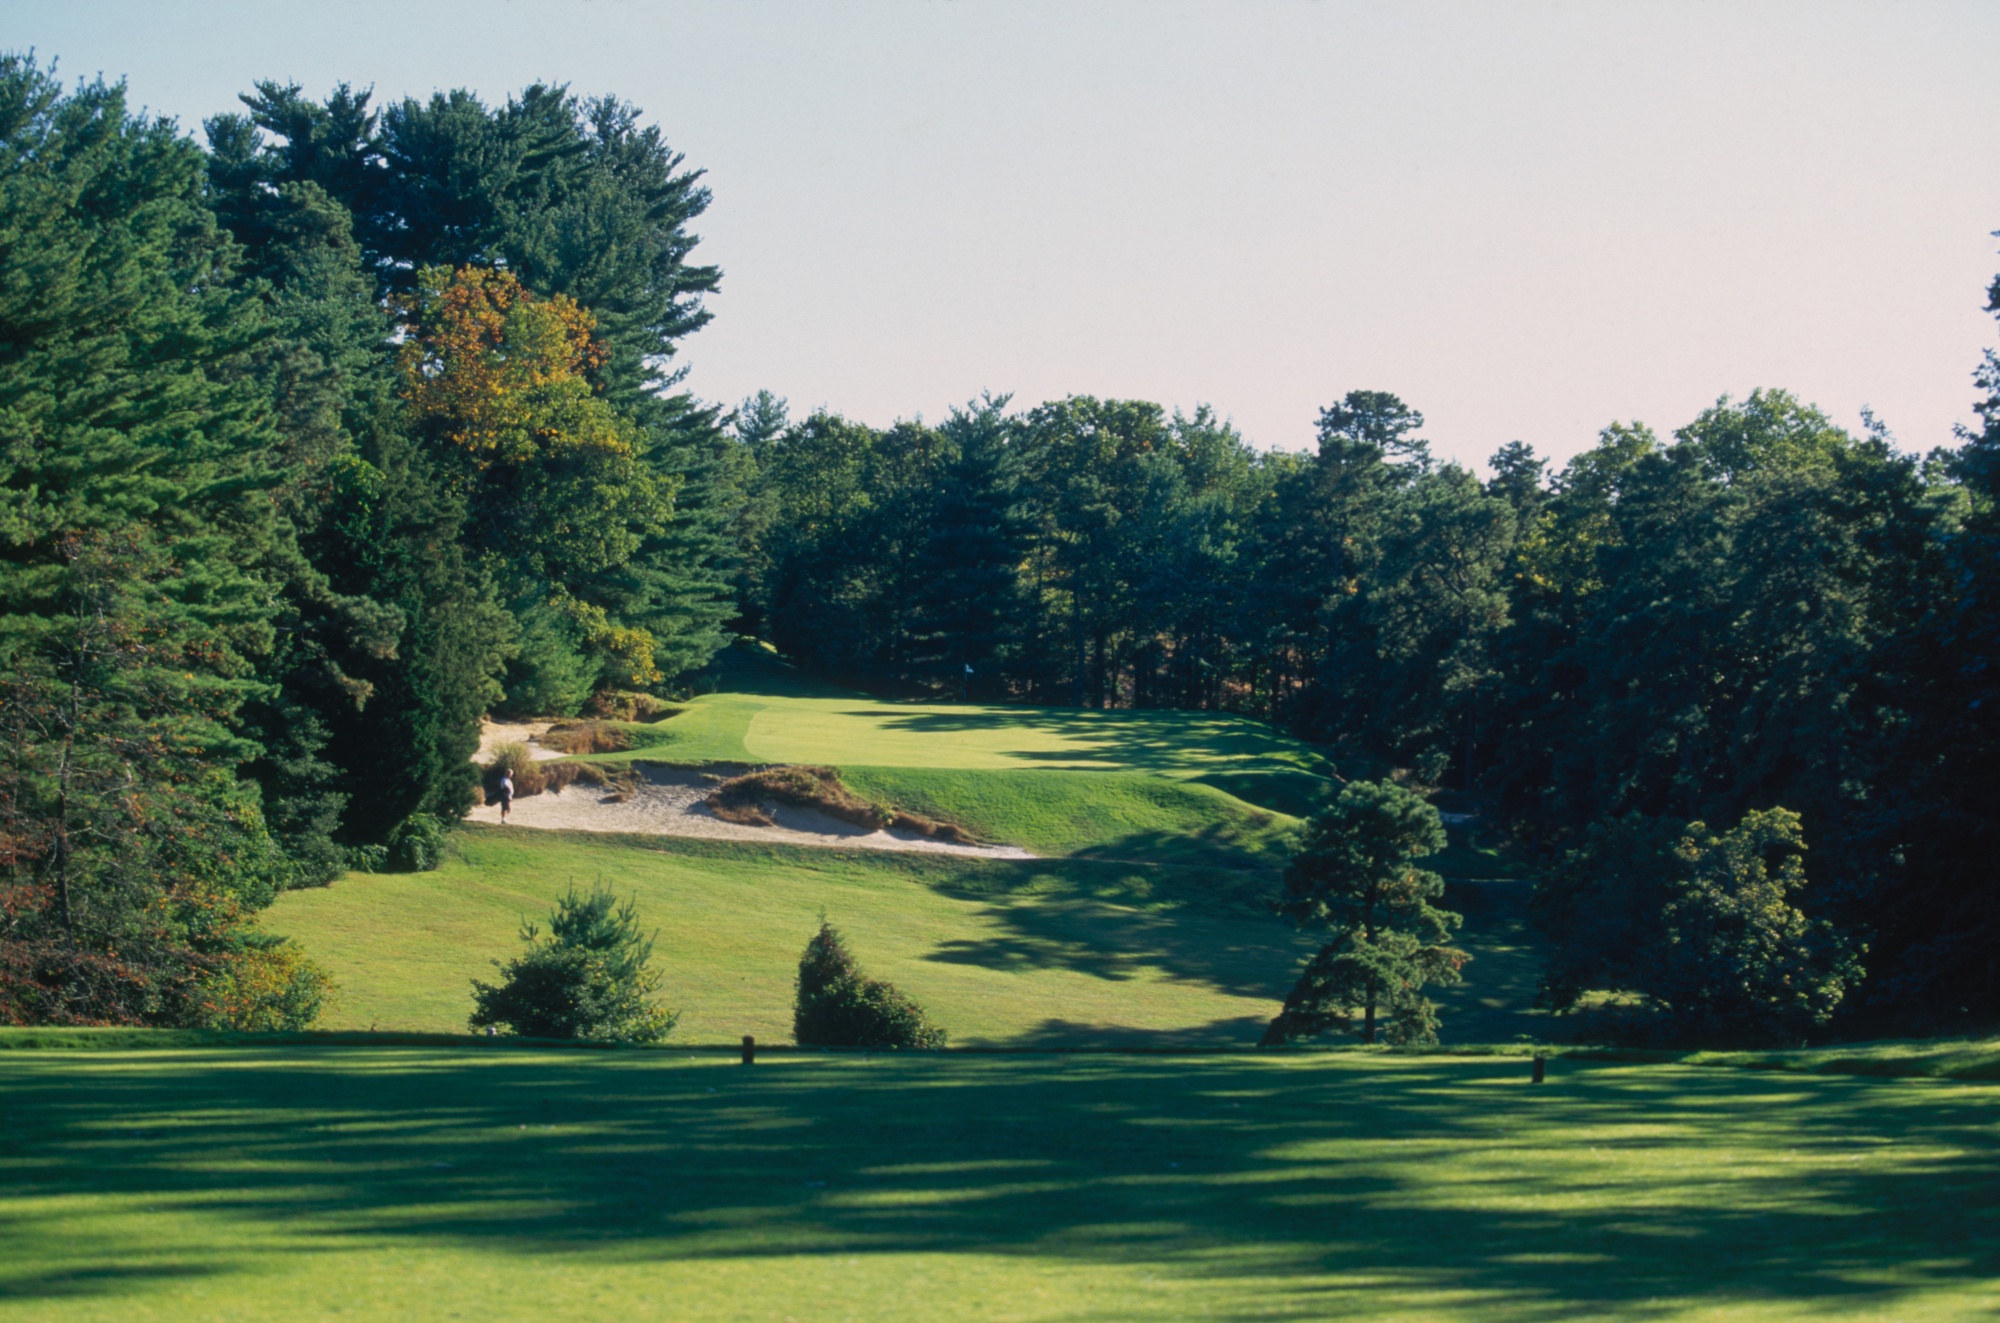 The Pine Valley Golf Club in 1996.